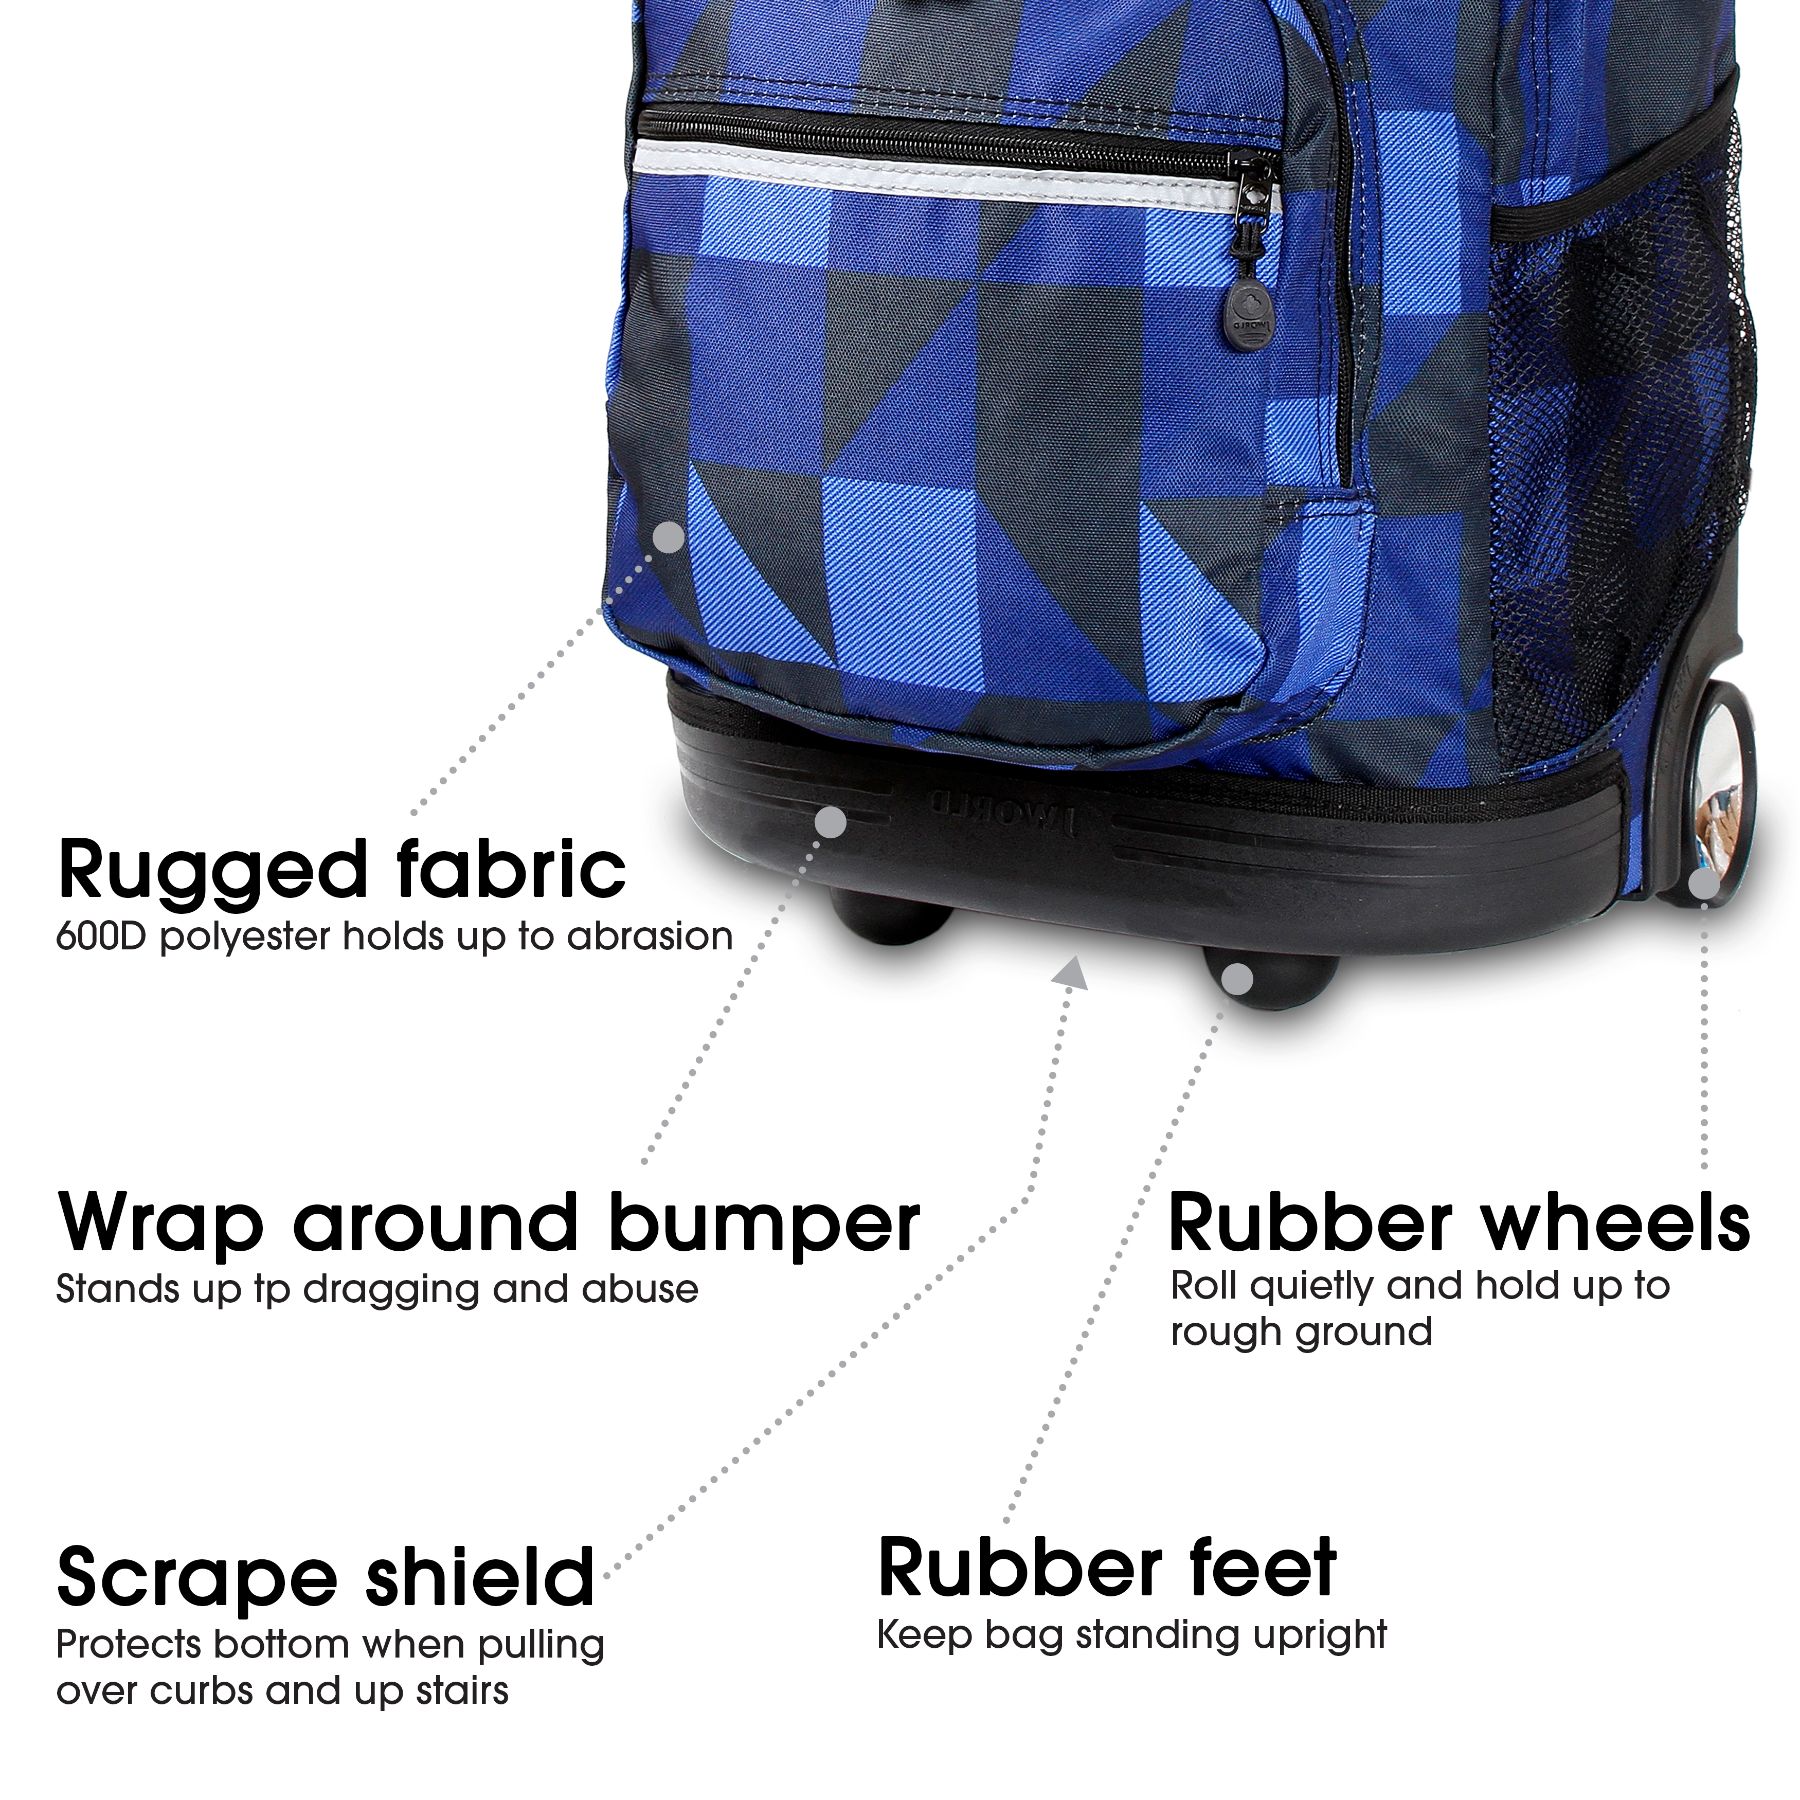 J World Boys and Girls Sunrise 18" Rolling Backpack for School and Travel, Block Navy - image 5 of 6